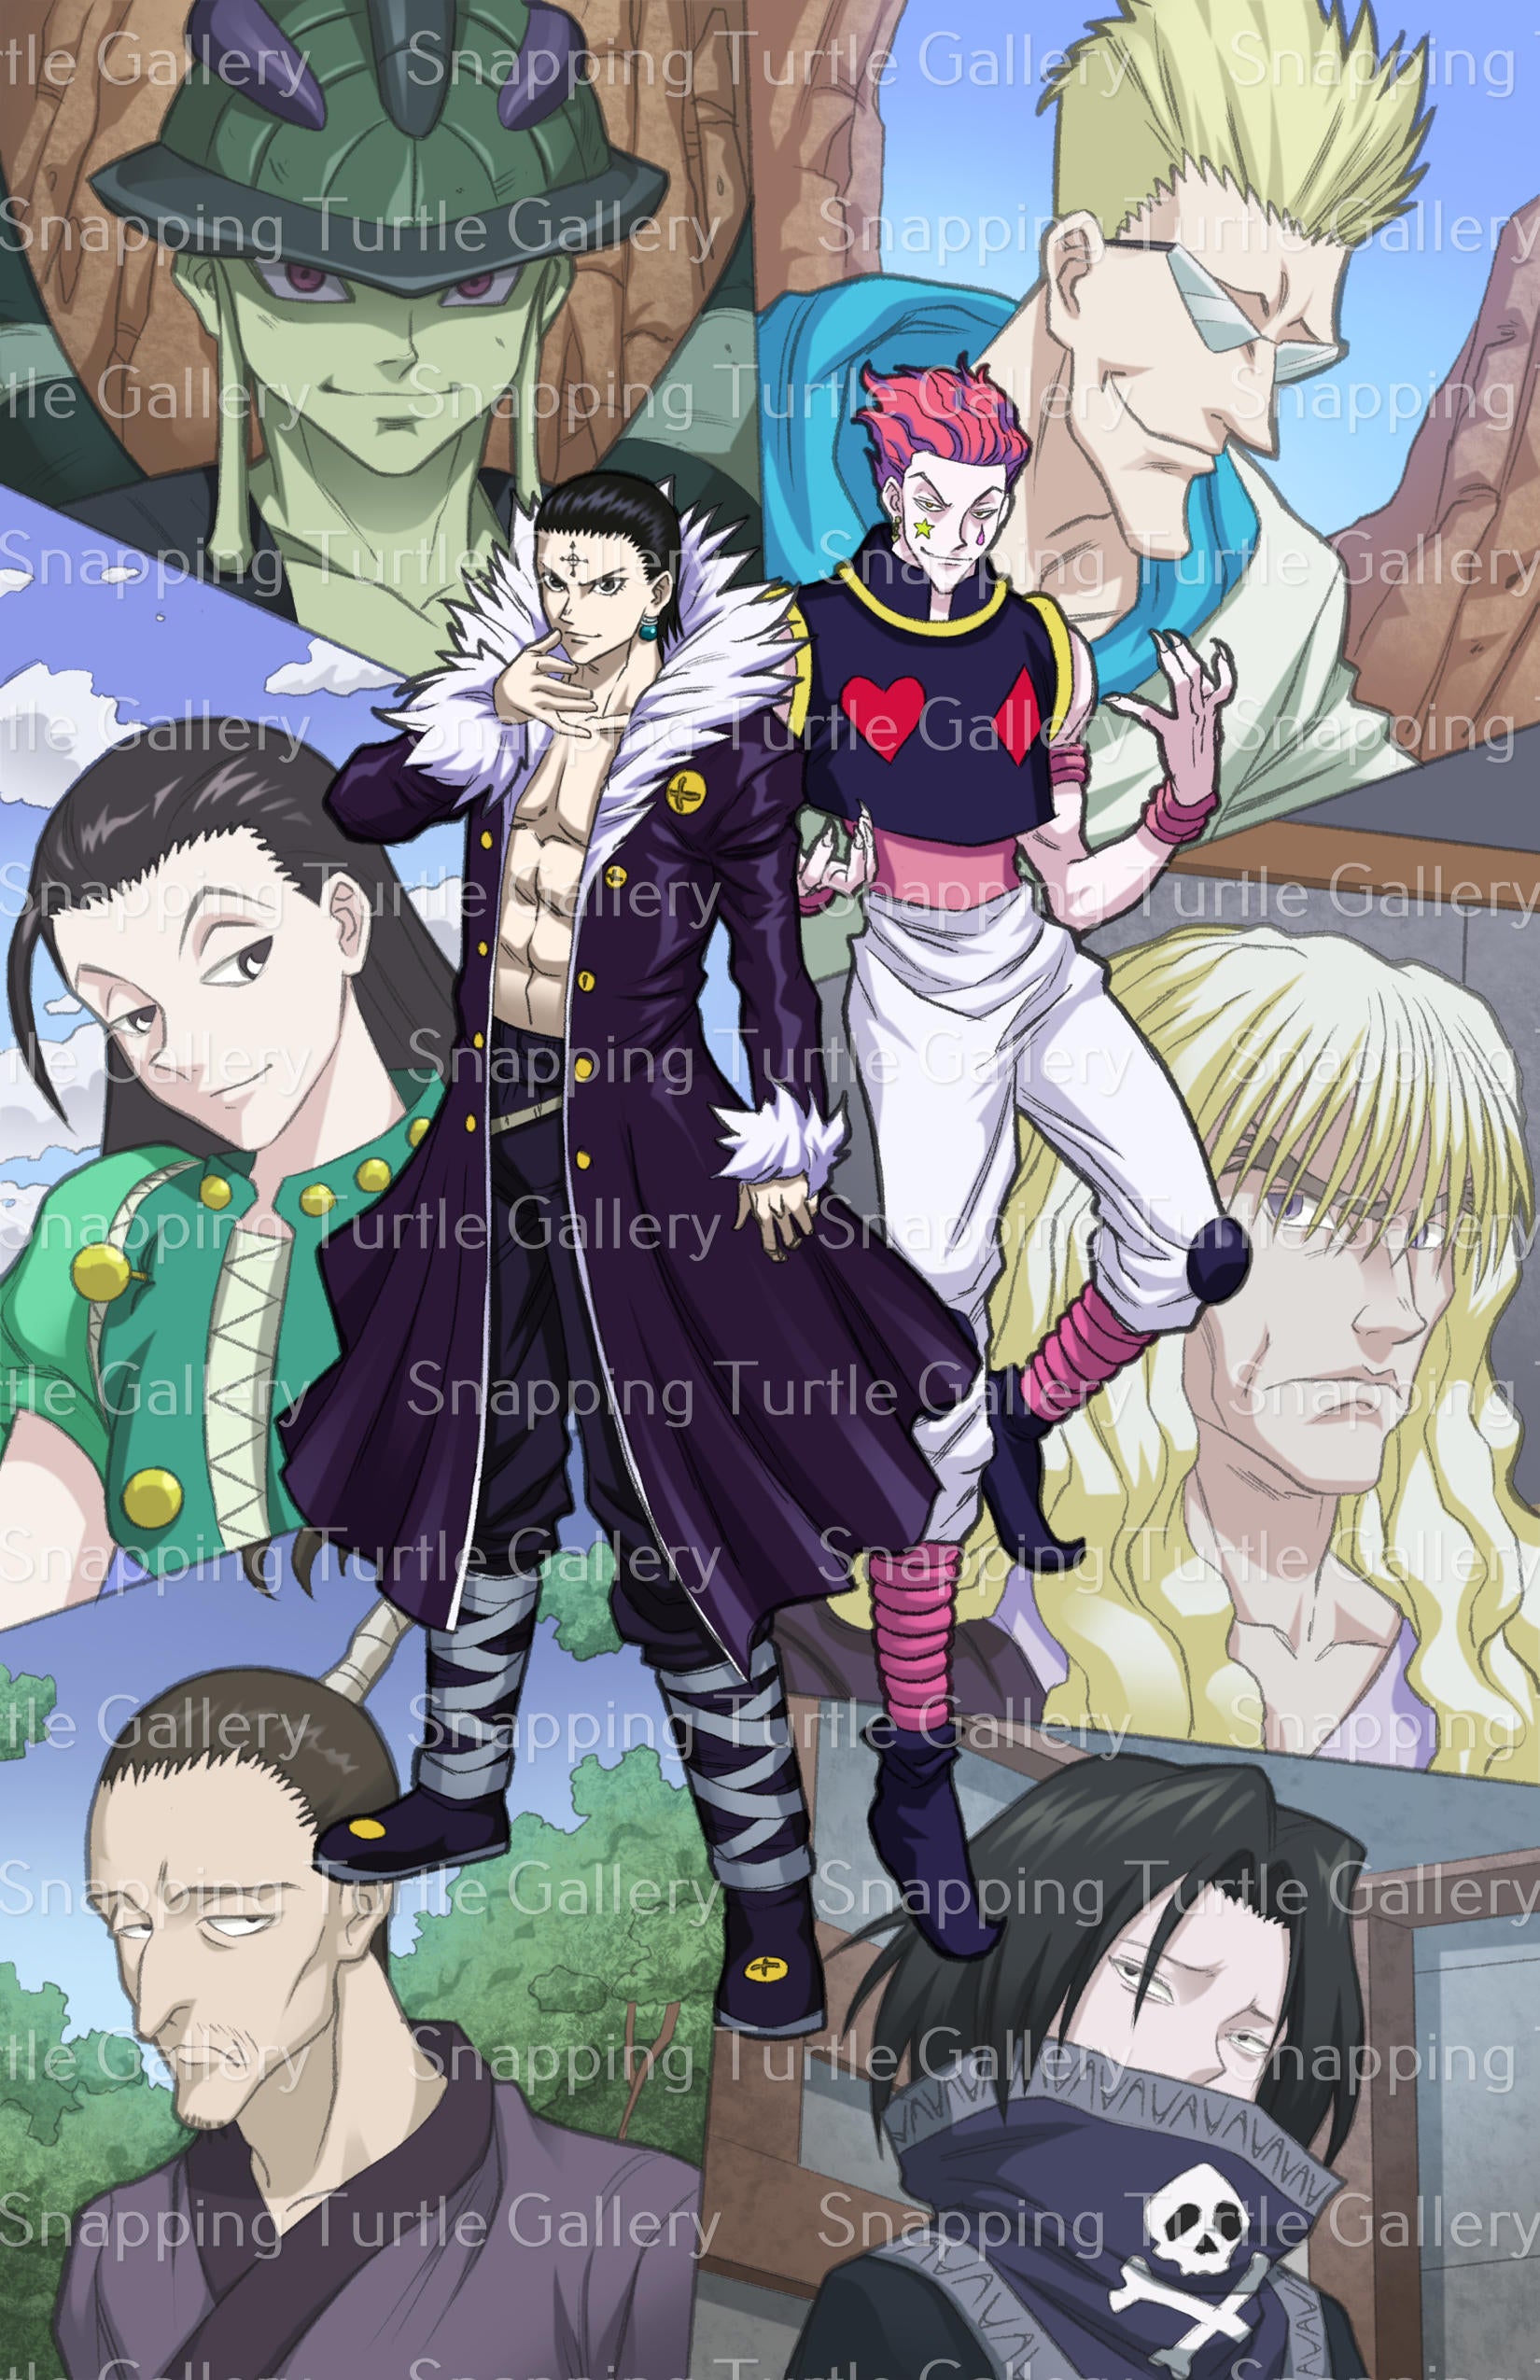 Super Villains of Hunter X Hunter - Snapping Turtle Gallery